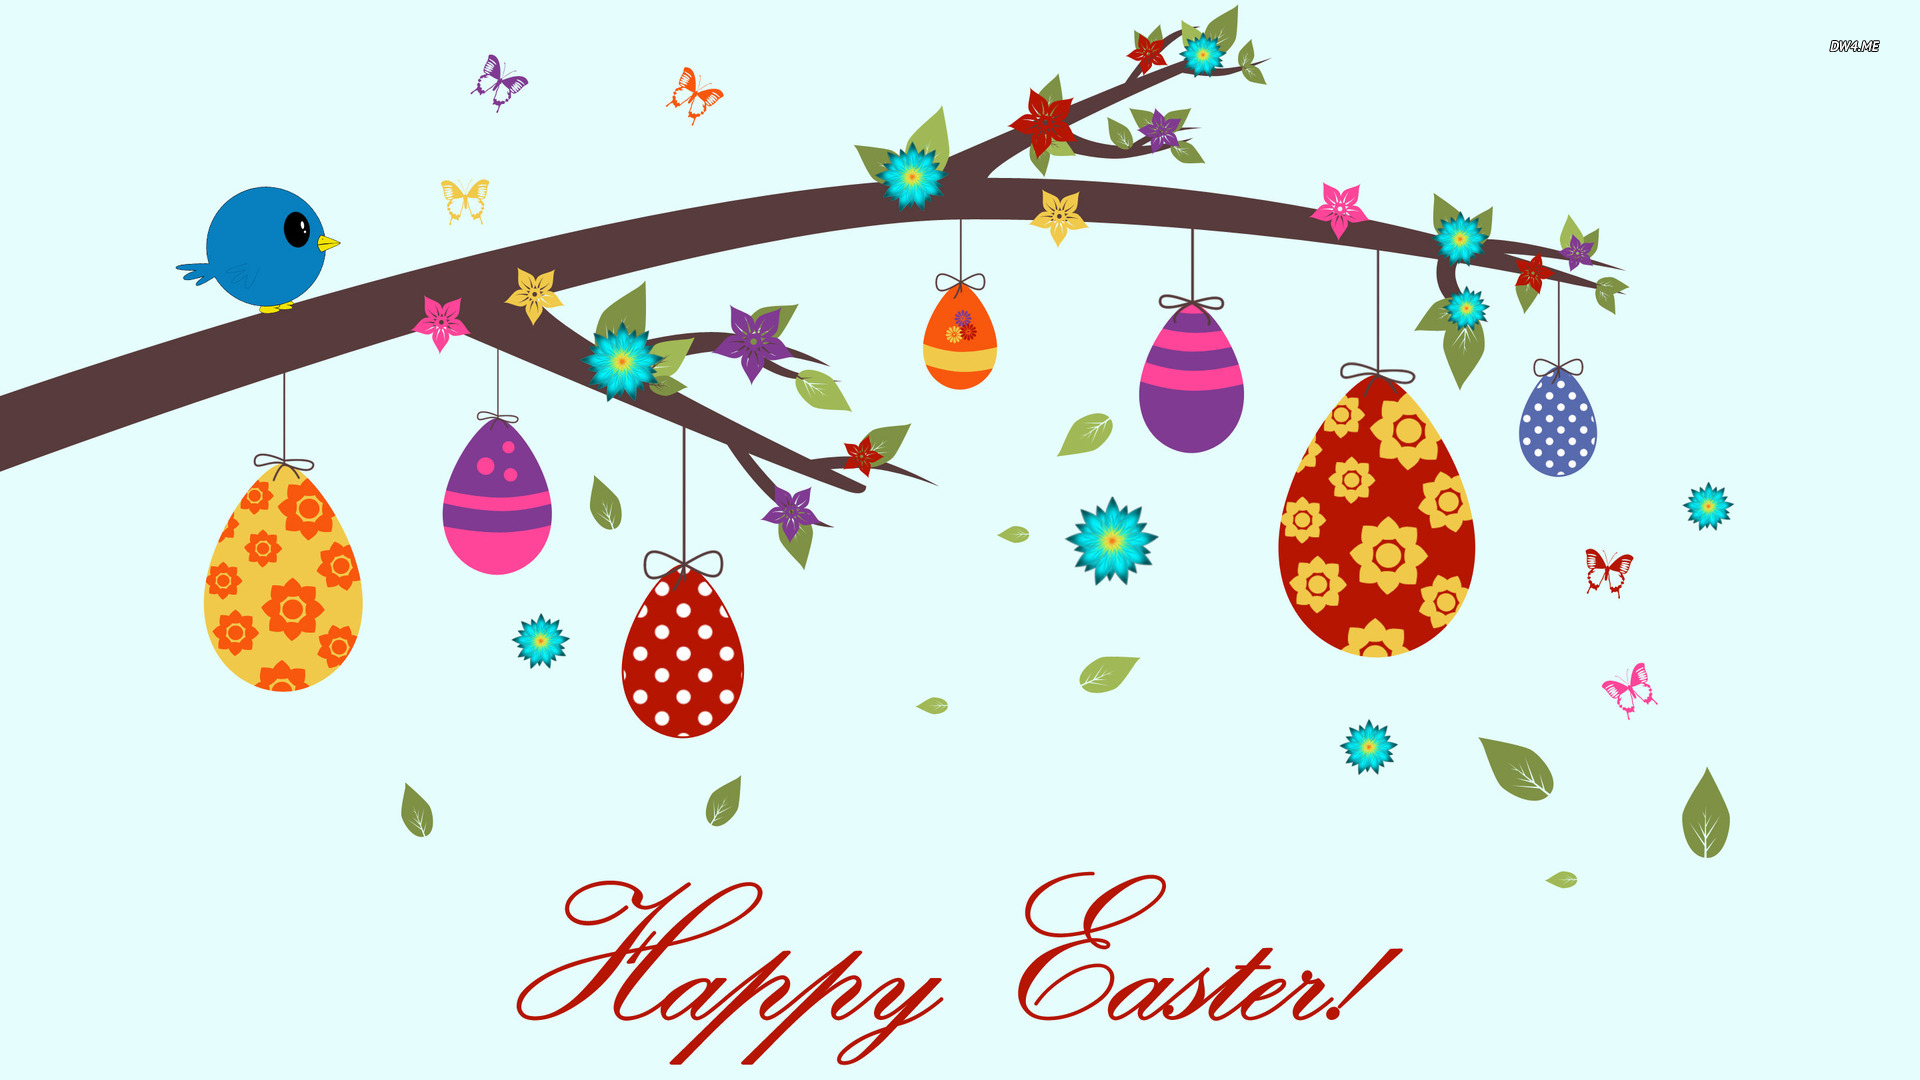 Happy Easter Pictures Download | HD Wallpapers, Backgrounds ...